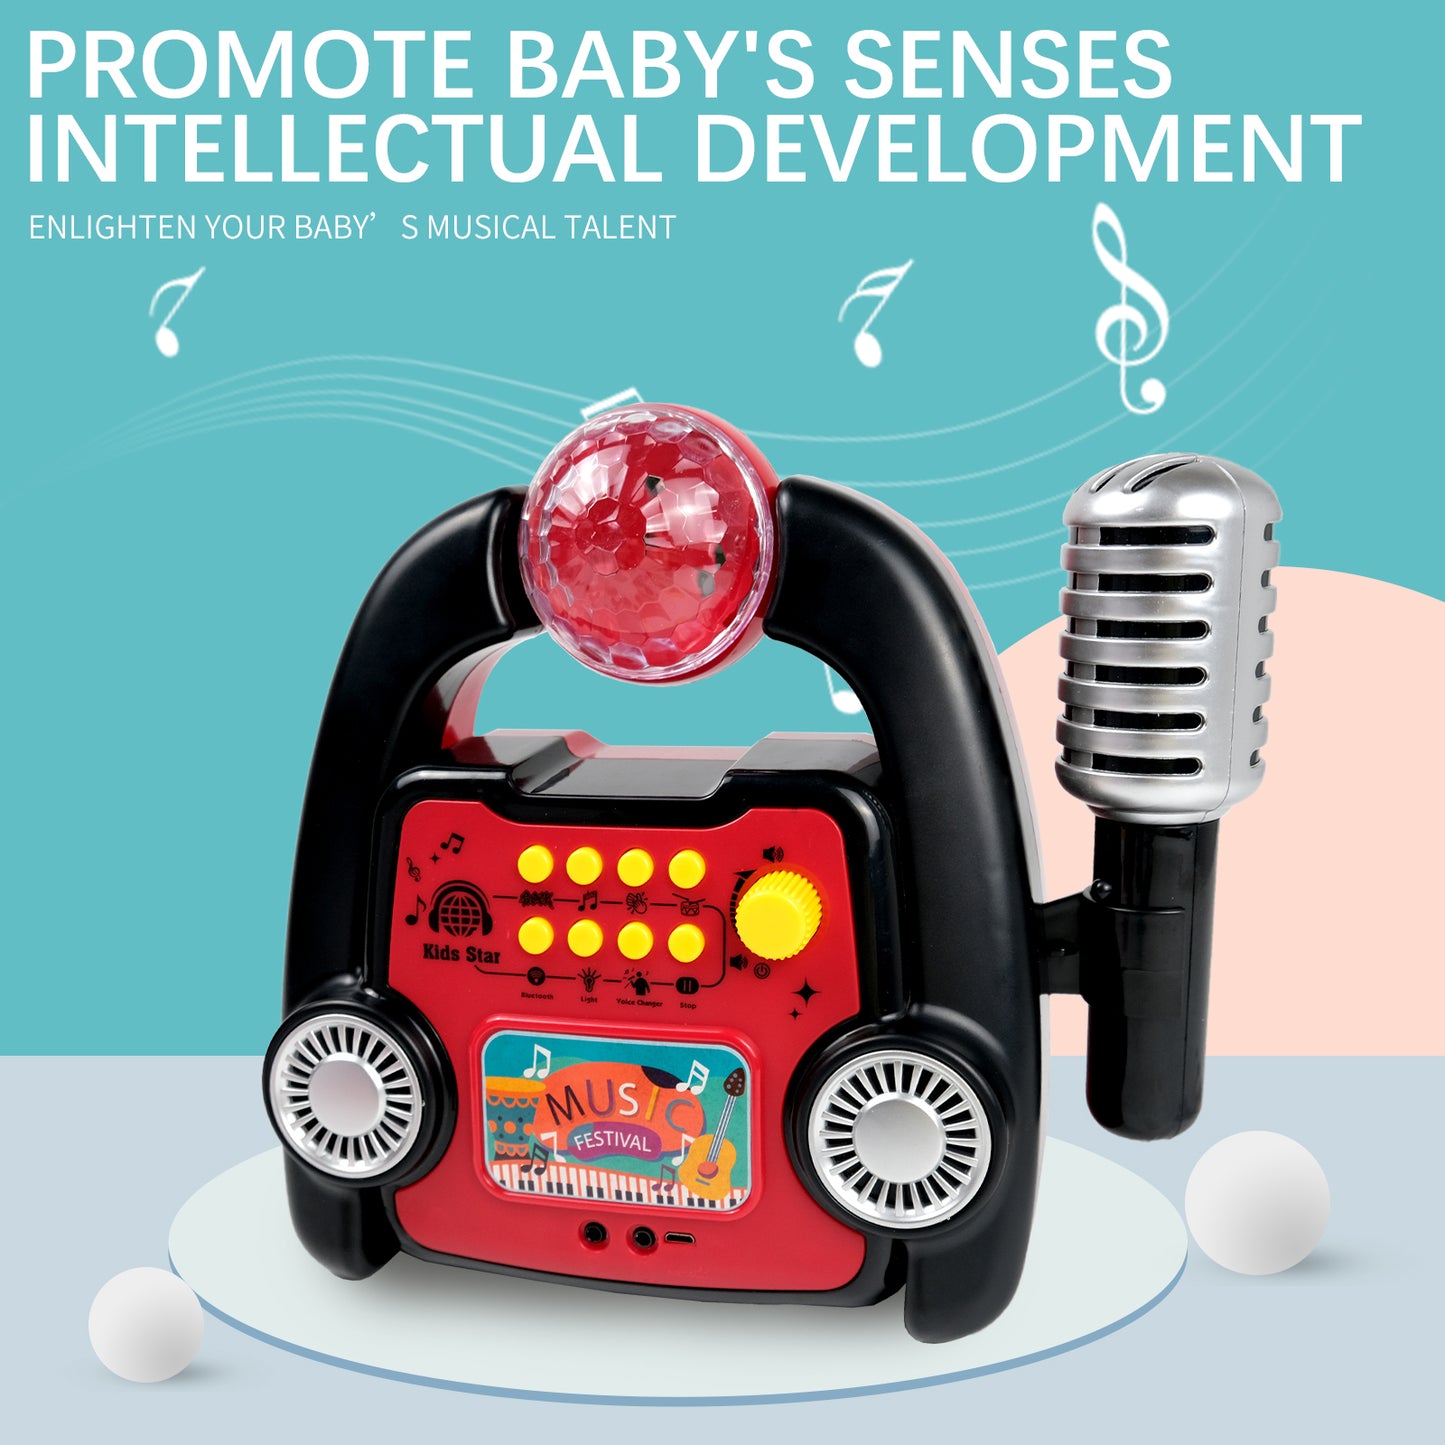 AOQIMITENJOY Musical Instrument Electronic Bluetooth Karaoke Machine Toys with Micphone Lighting Children's Toys Birthday Gifts for Boys and Girls 3 Year Old+ HK-8198ACP